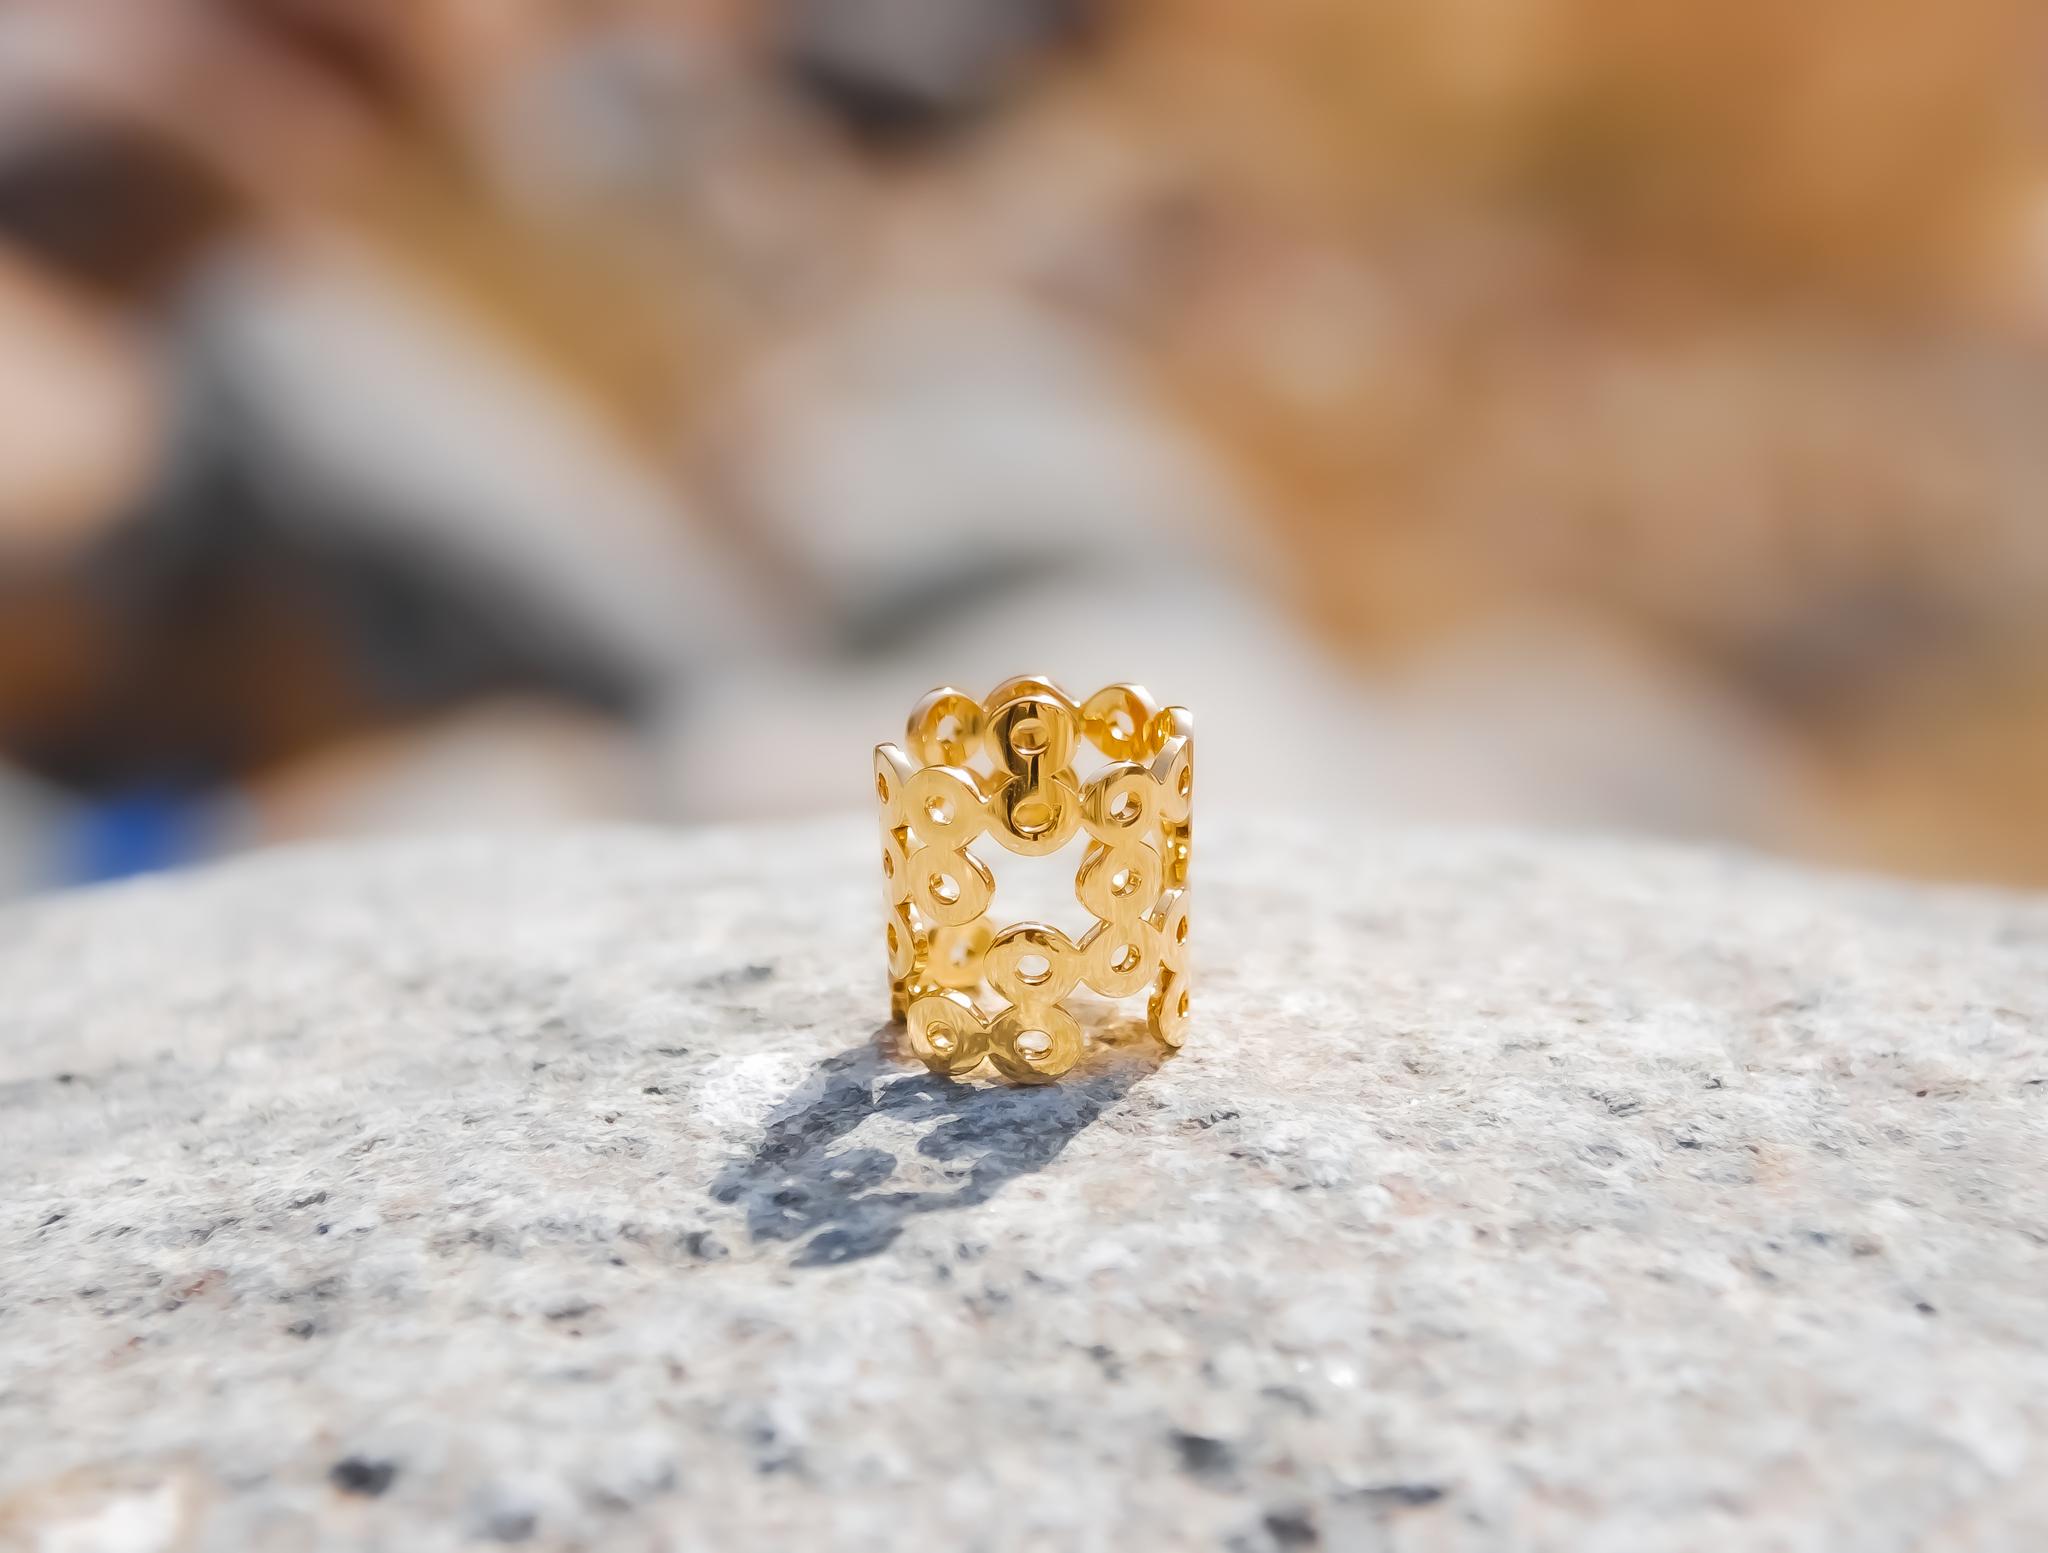 Geometric Bubbles Ring in 18kt Yellow Gold

Ring is resizable